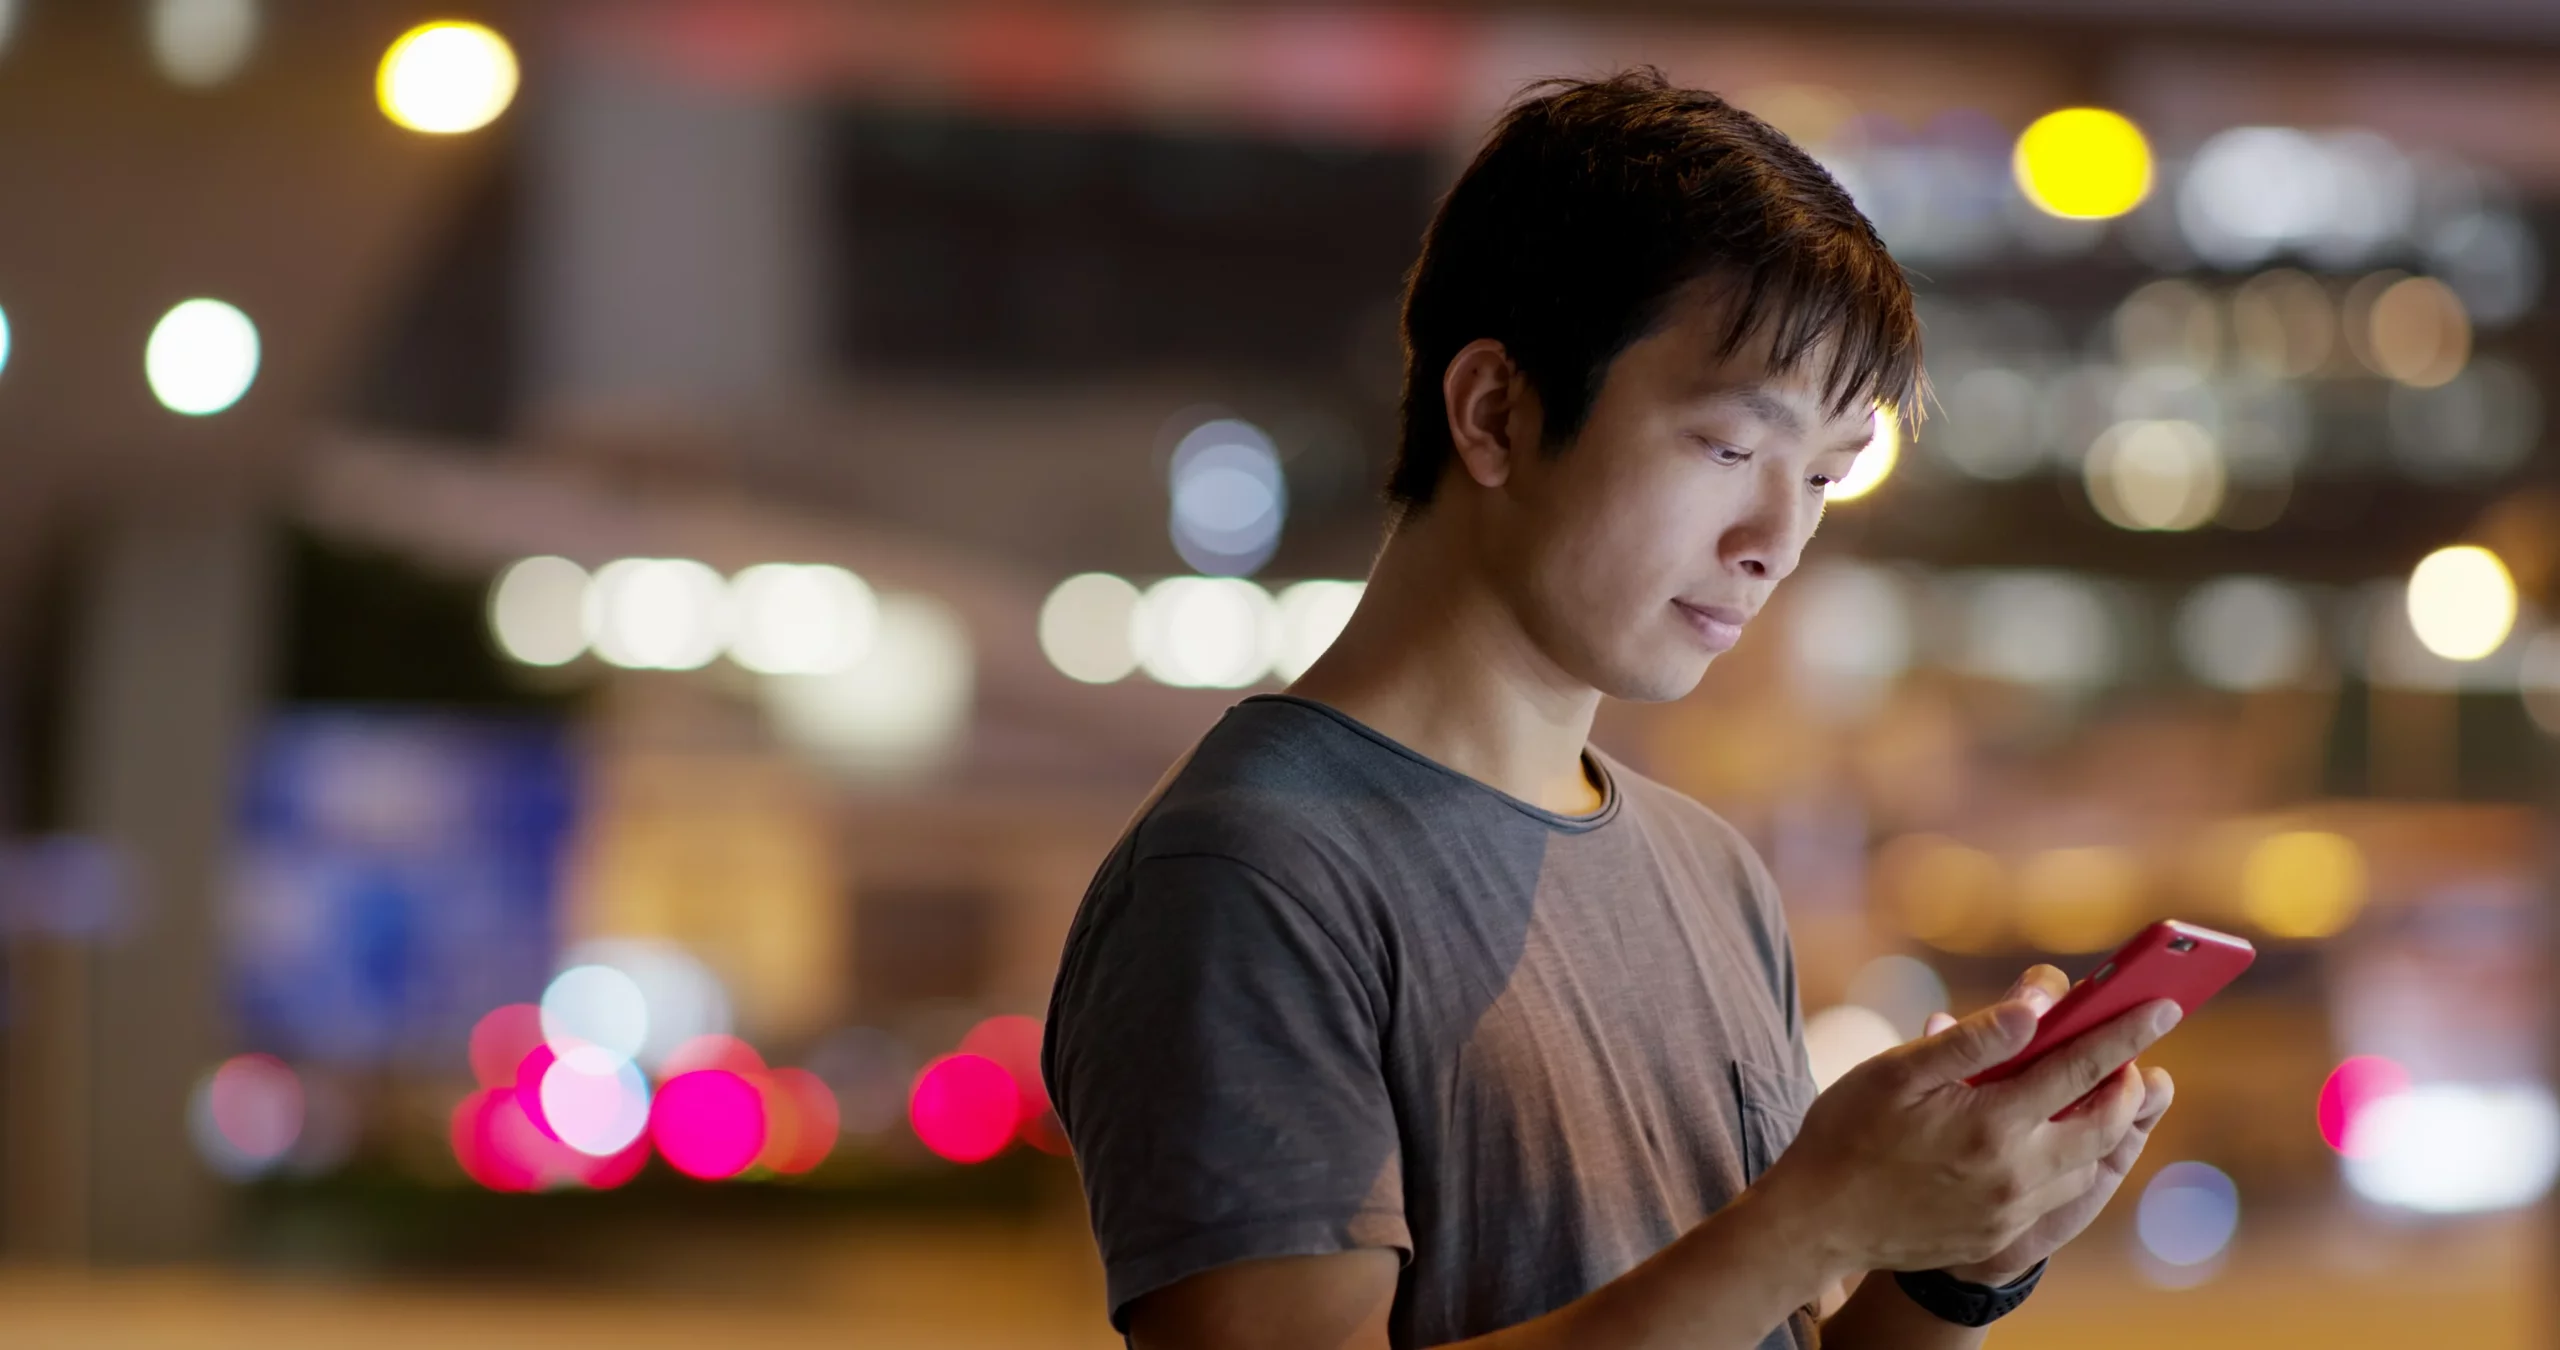 man looking at his phone in the middle of the street at night